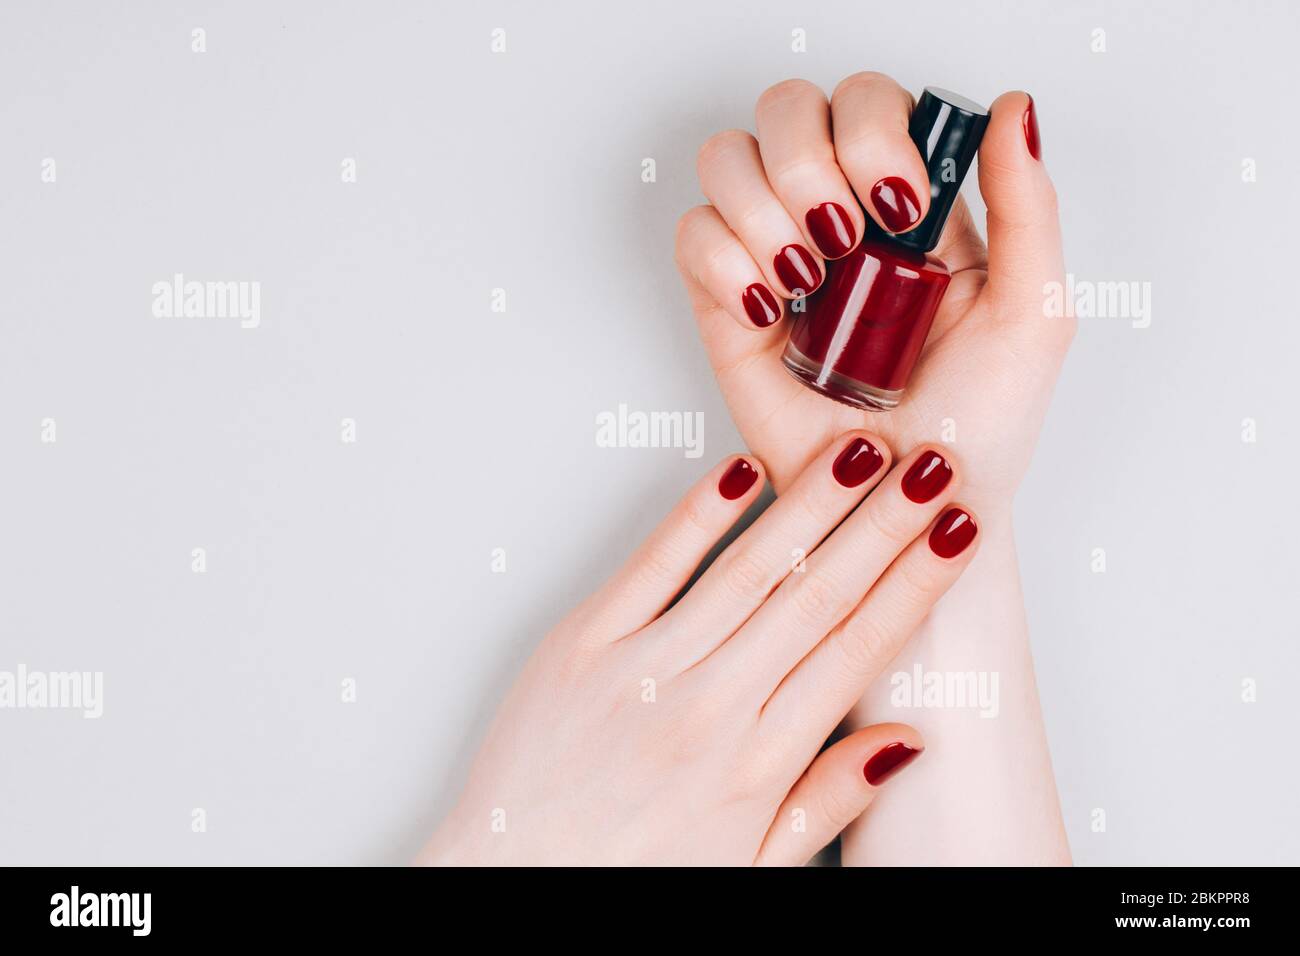 Womans Hand Colorful Nails Paint On Stock Photo 540902722 | Shutterstock